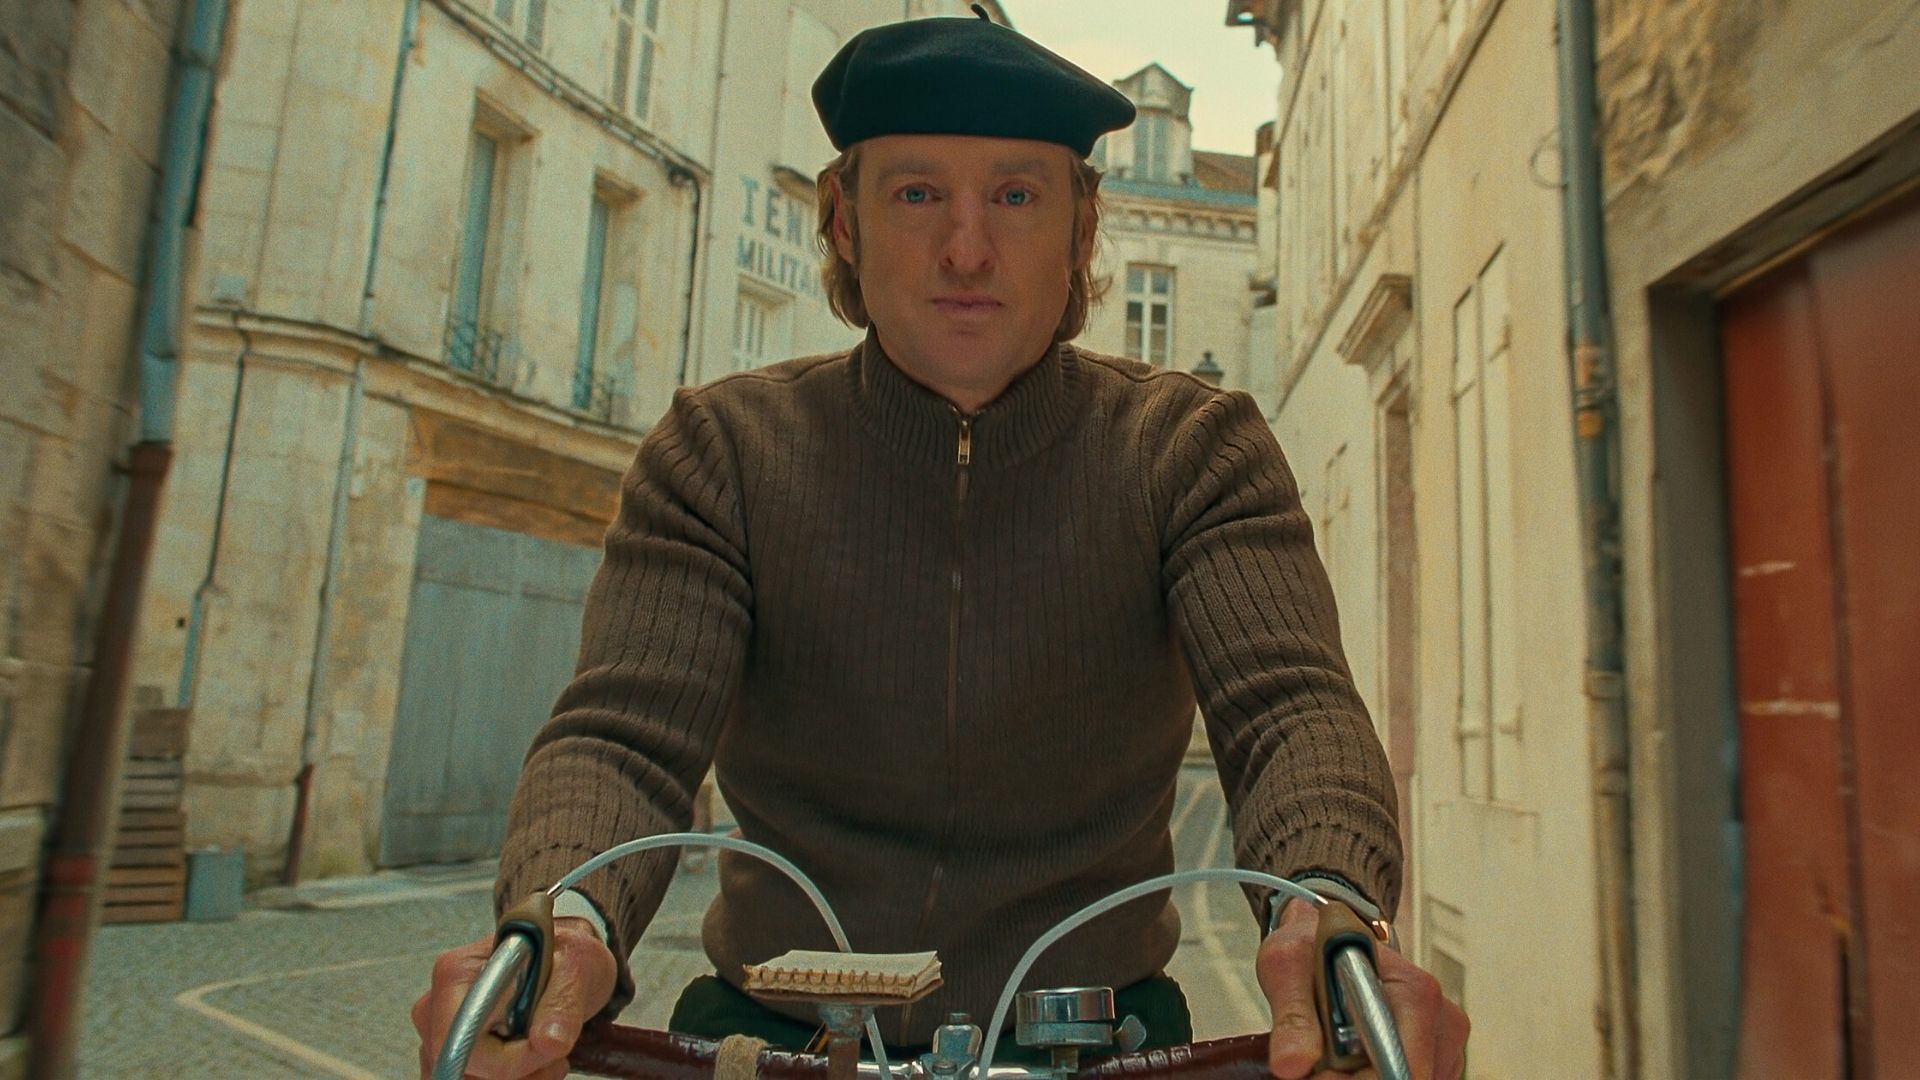 Actor Owen Wilson rides a bike in the film The French Dispatch